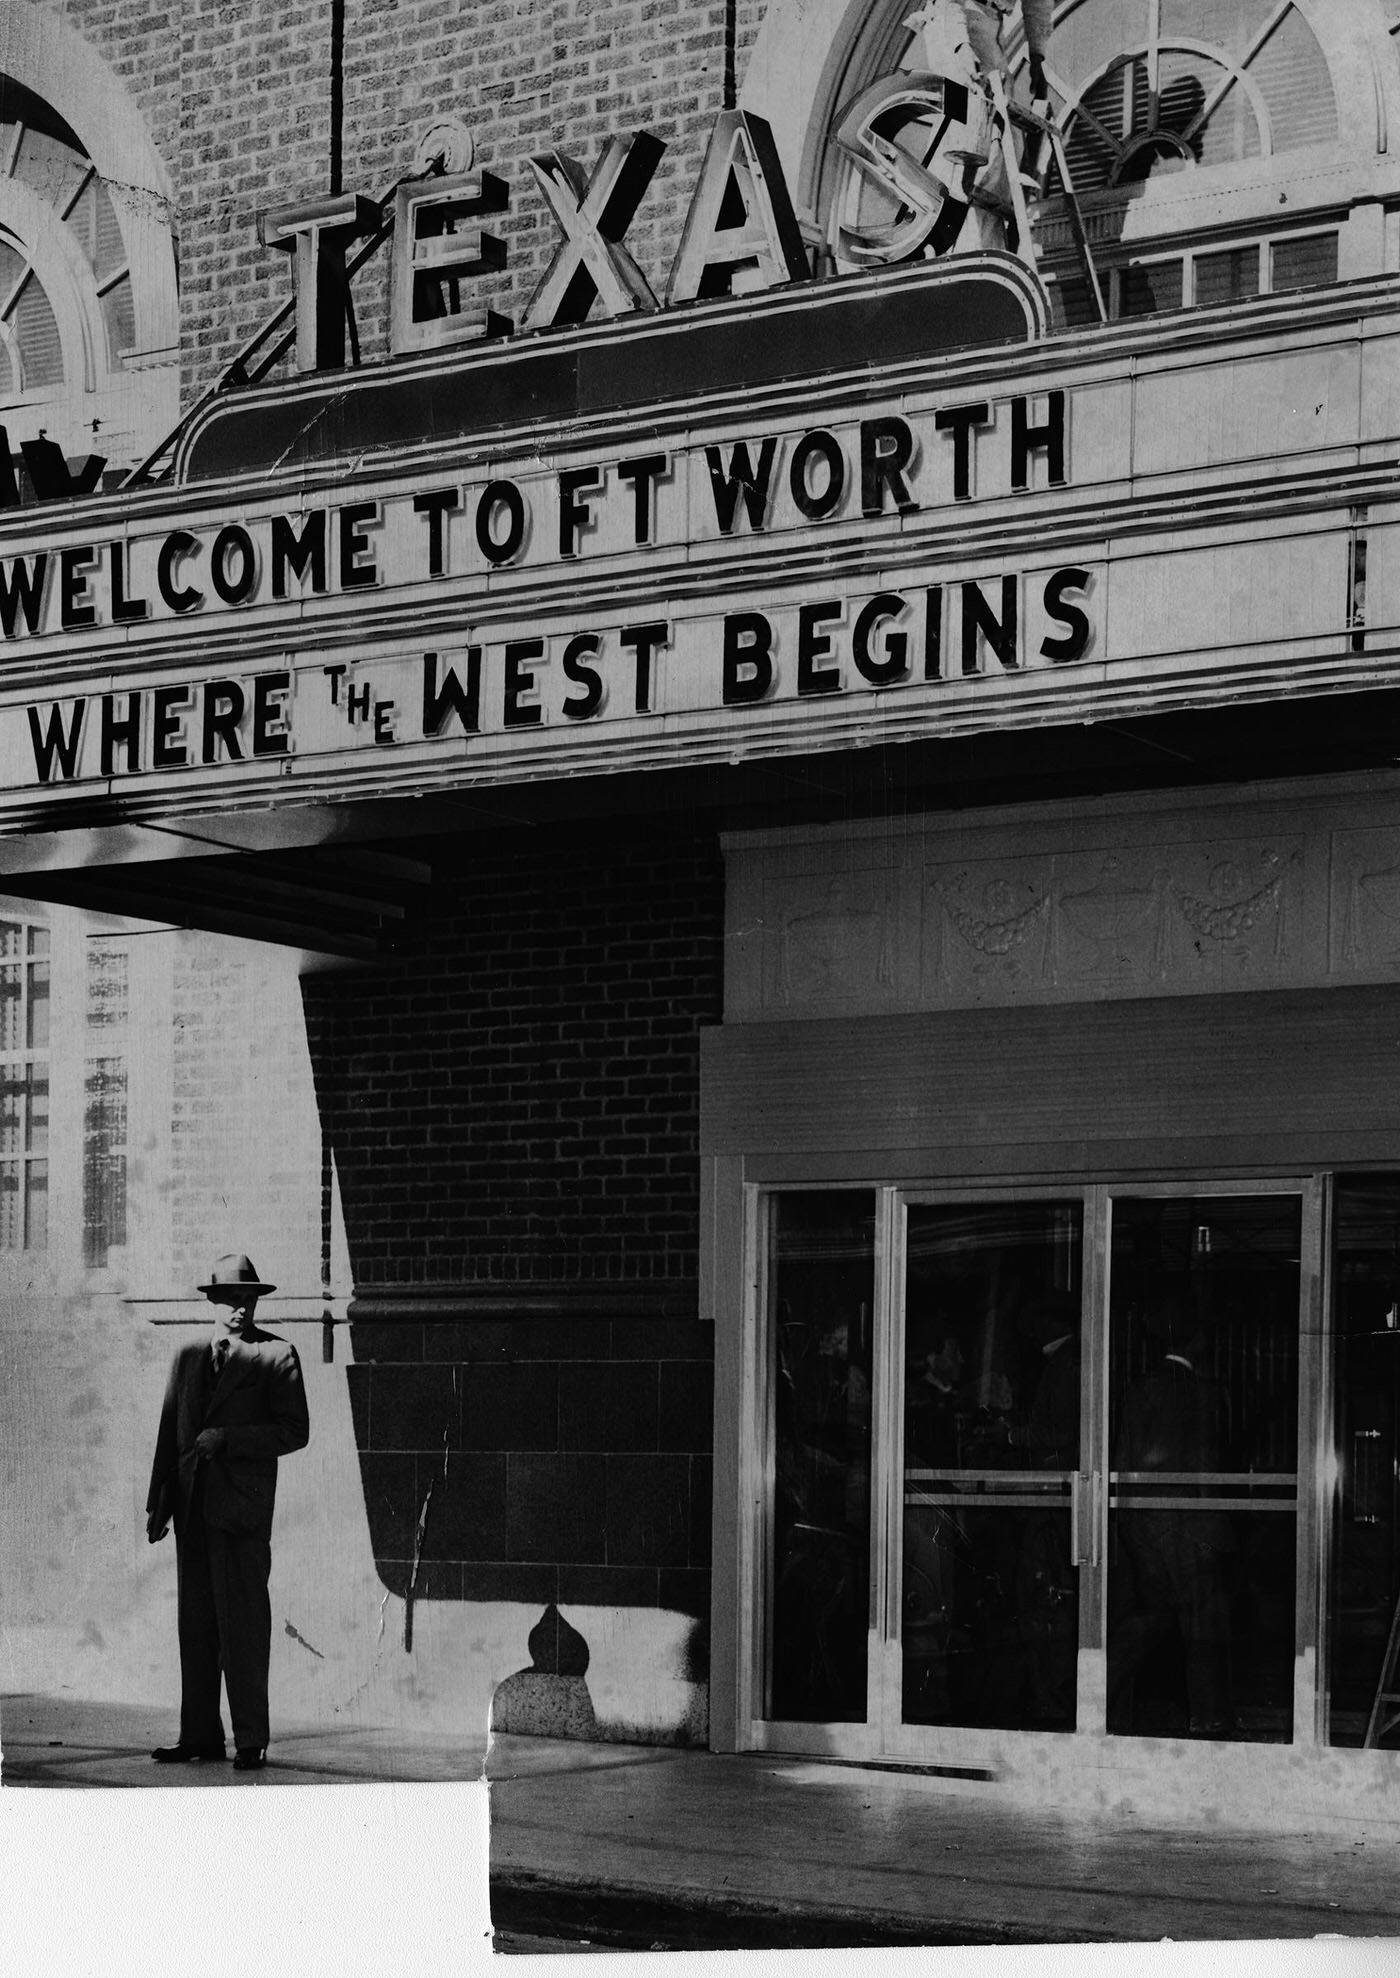 Hotel Texas "Welcome to Ft. Worth Where the West Begins" marquee at entrance, 1949